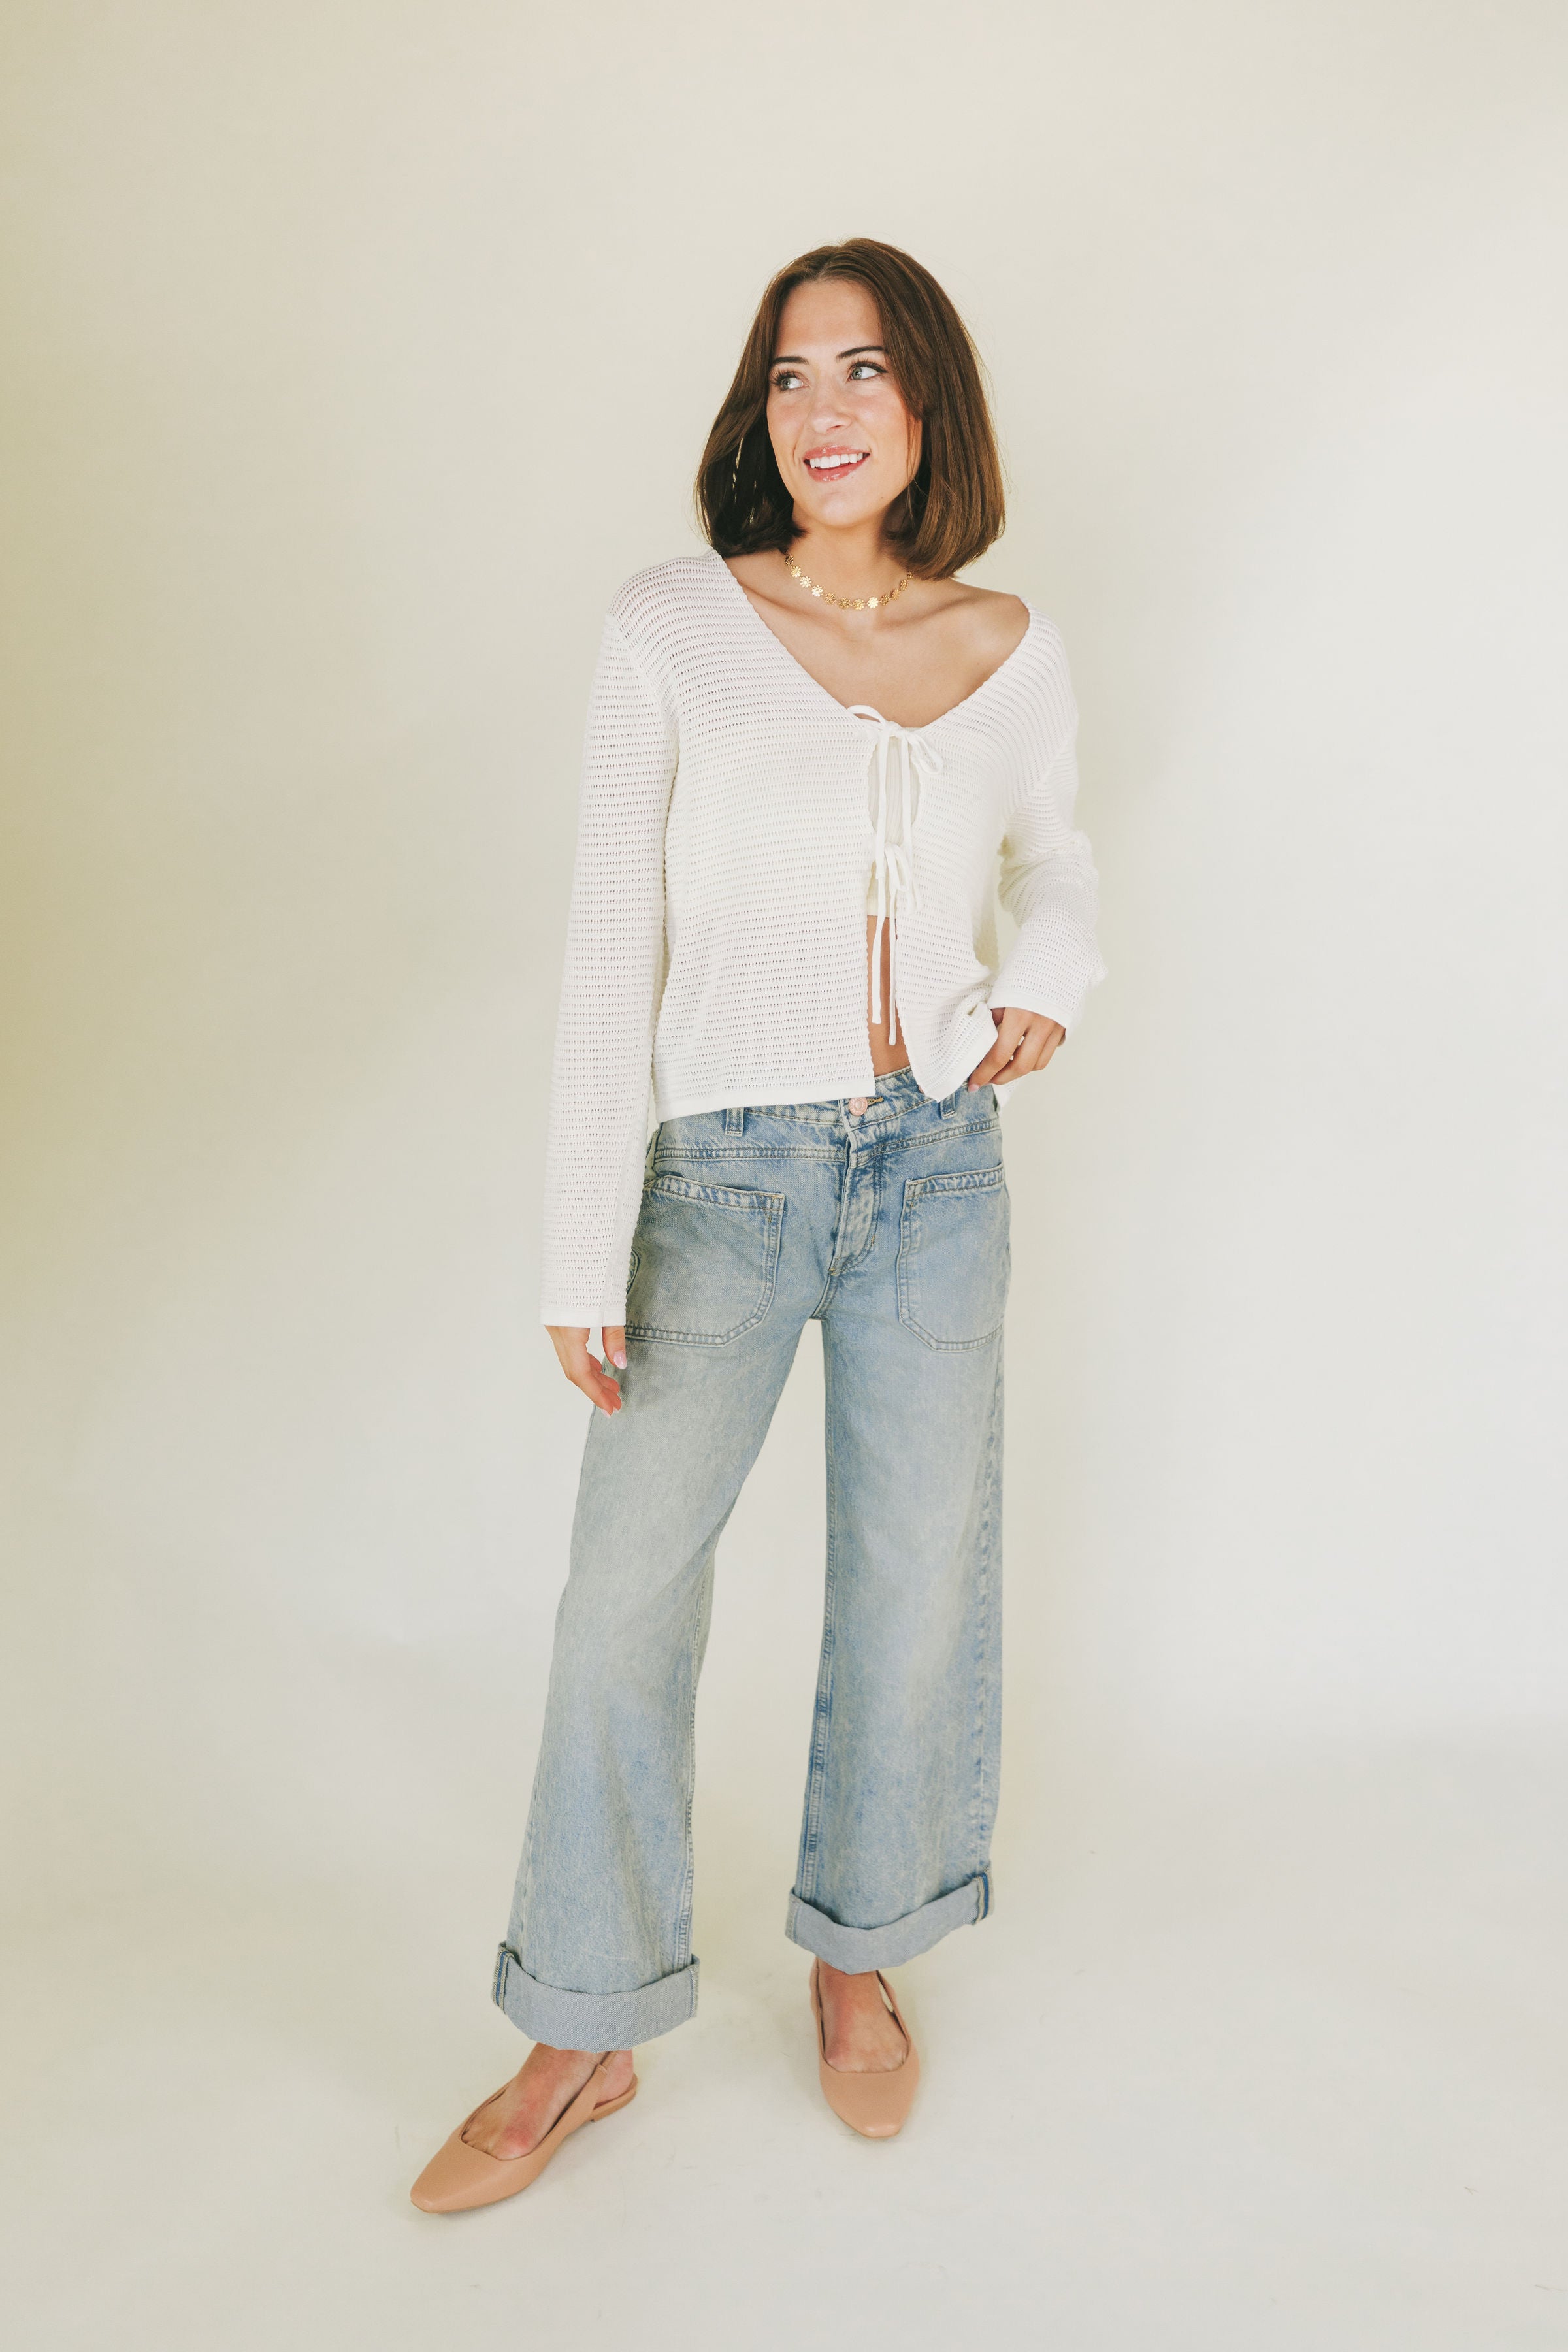 FREE PEOPLE - Palmer Cuffed Jeans - 2 Colors